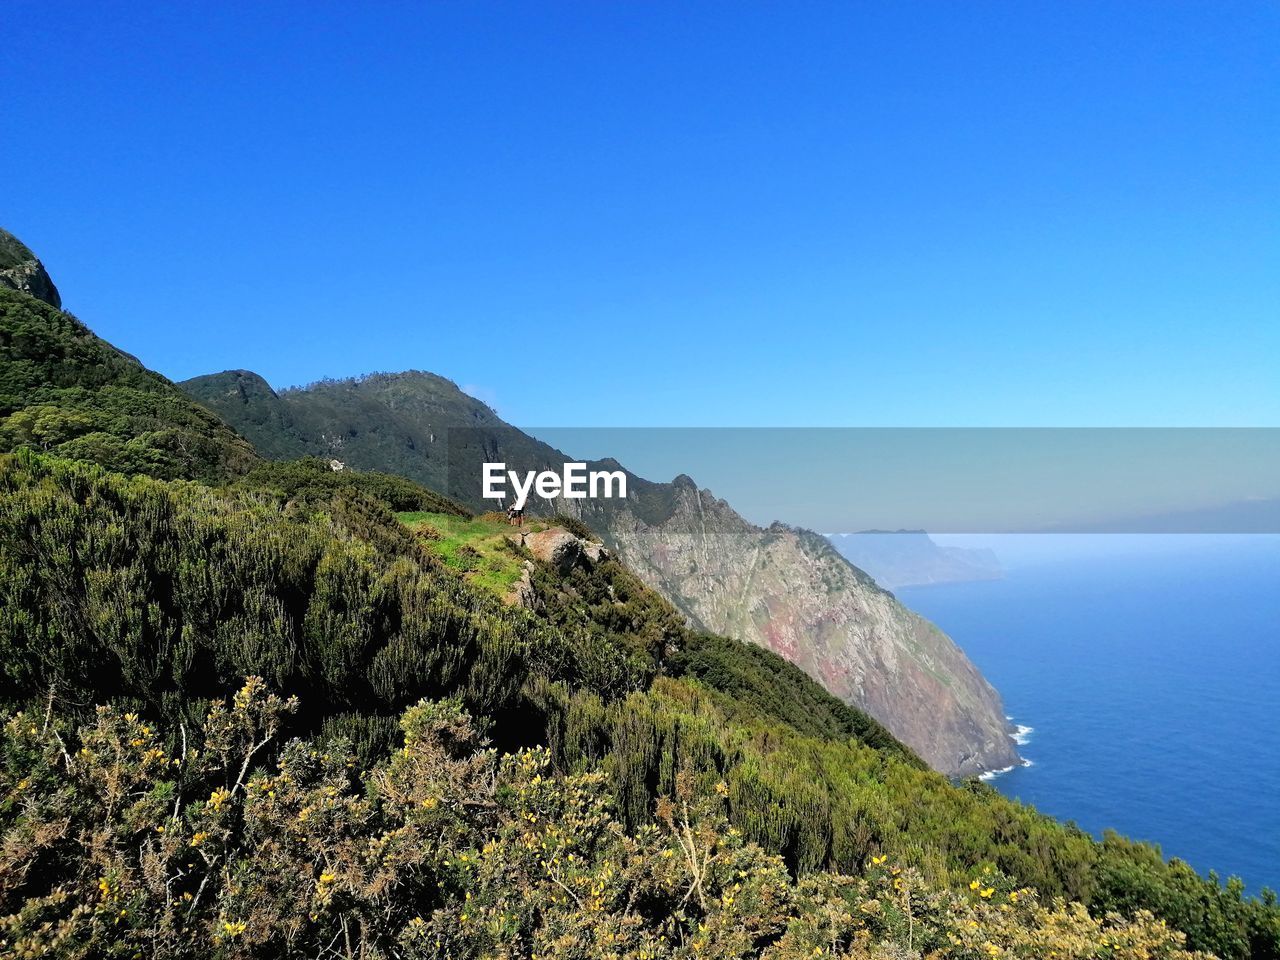 SCENIC VIEW OF SEA BY MOUNTAINS AGAINST CLEAR BLUE SKY